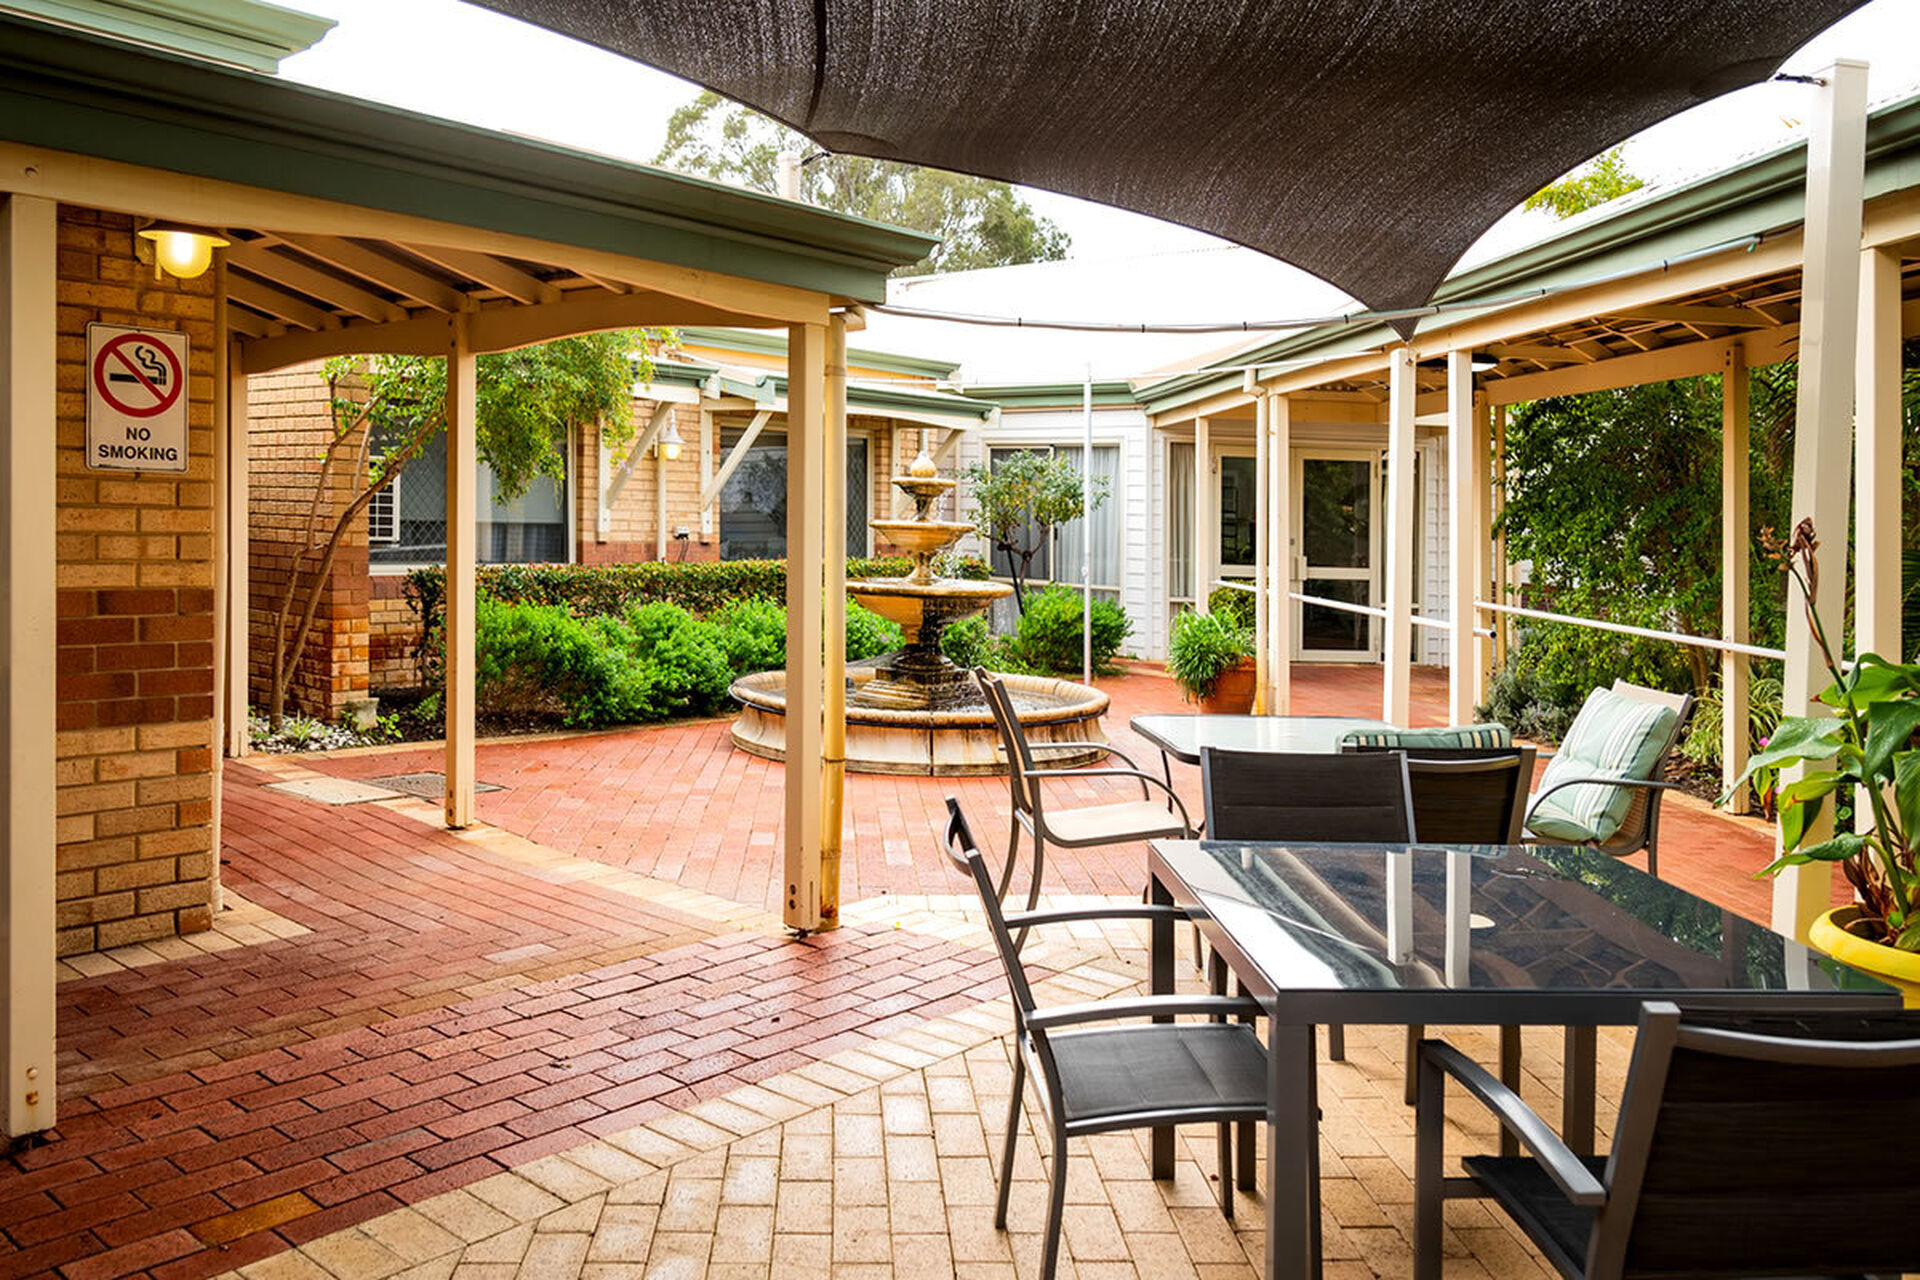 modern garden and outdoor sitting area for nursing home residents to enjoy at baptistcare morrison gardens aged care home in midland wa